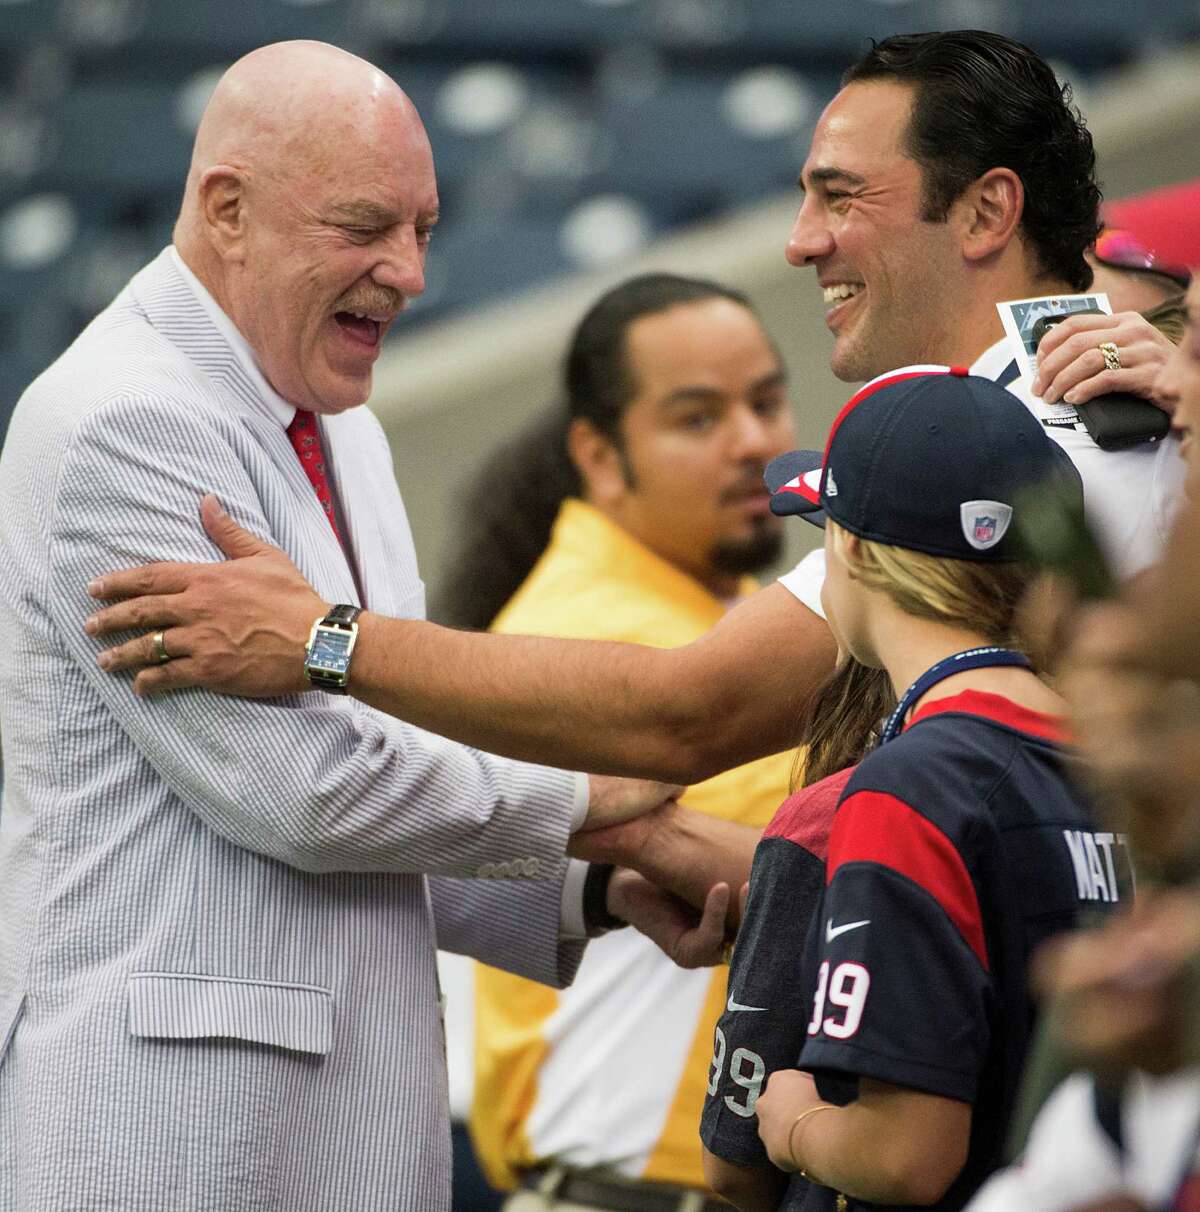 Despite only a pair of playoff victories in 13 seasons, Bob McNair and his Texans remain a perennial fan favorite in Houston